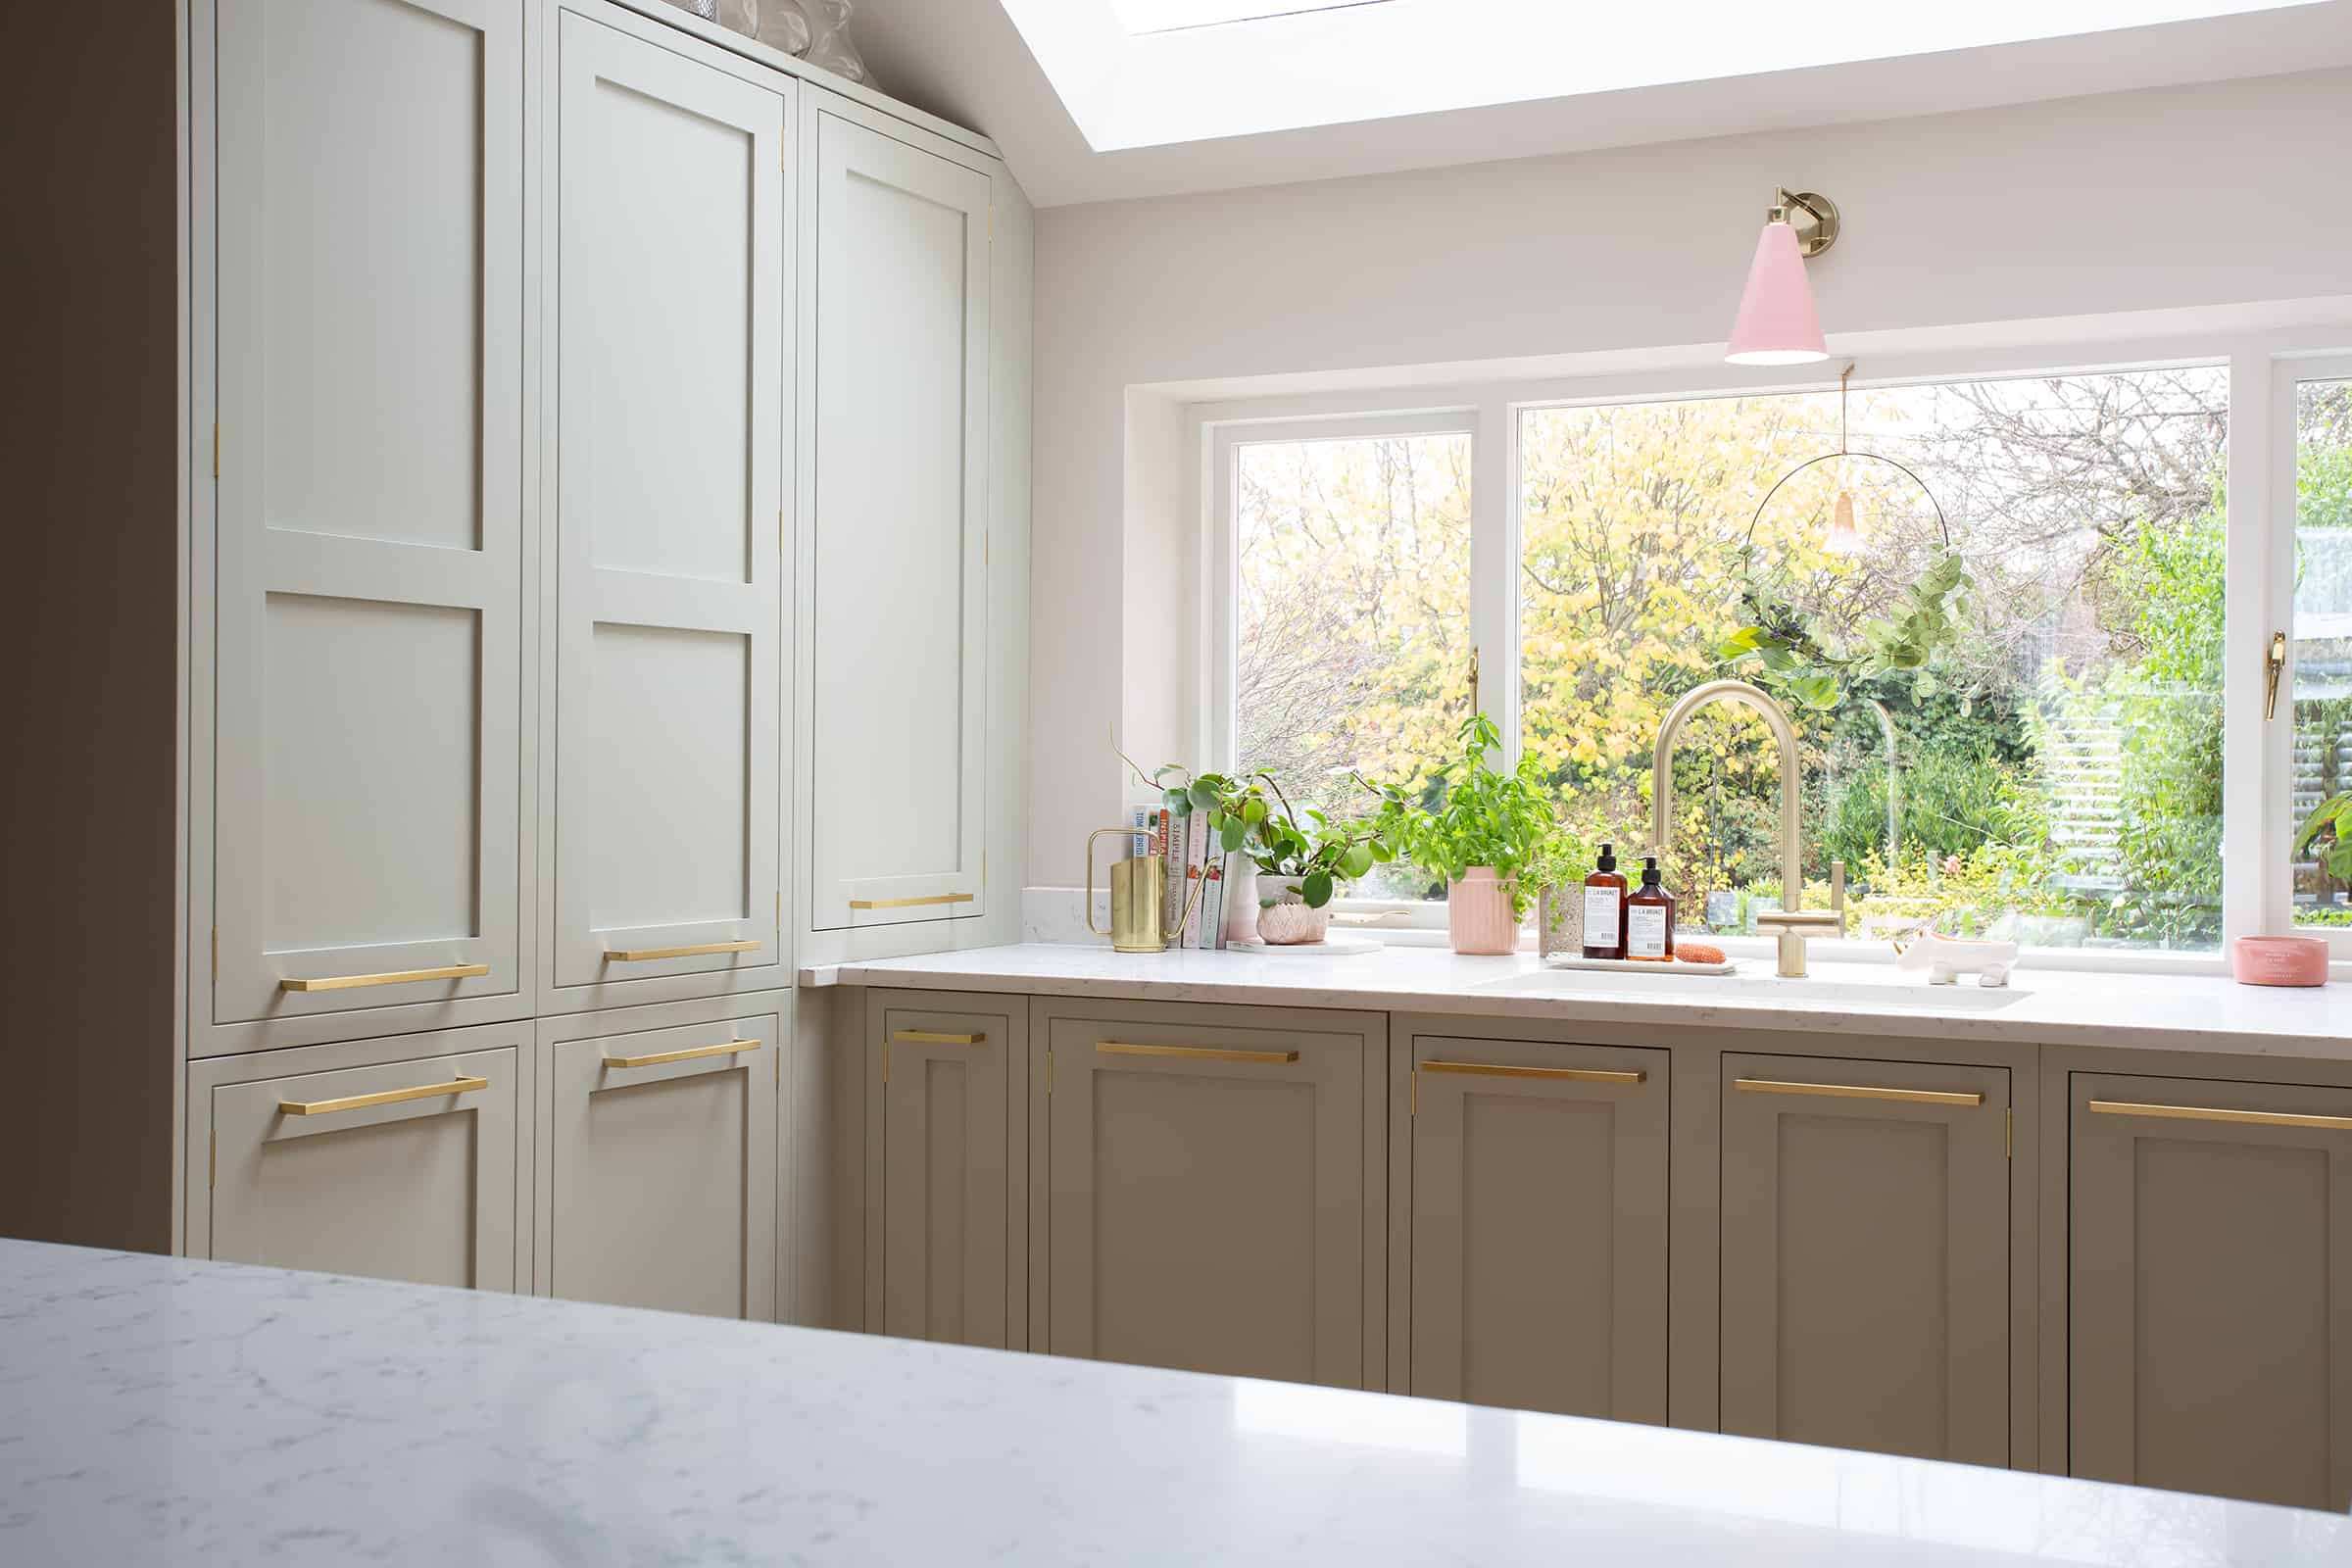 John Lewis of Hungerford swoonworthy luxury shaker style kitchen in soft green with pale pink accent walls with white marble worktops and gold metal handles